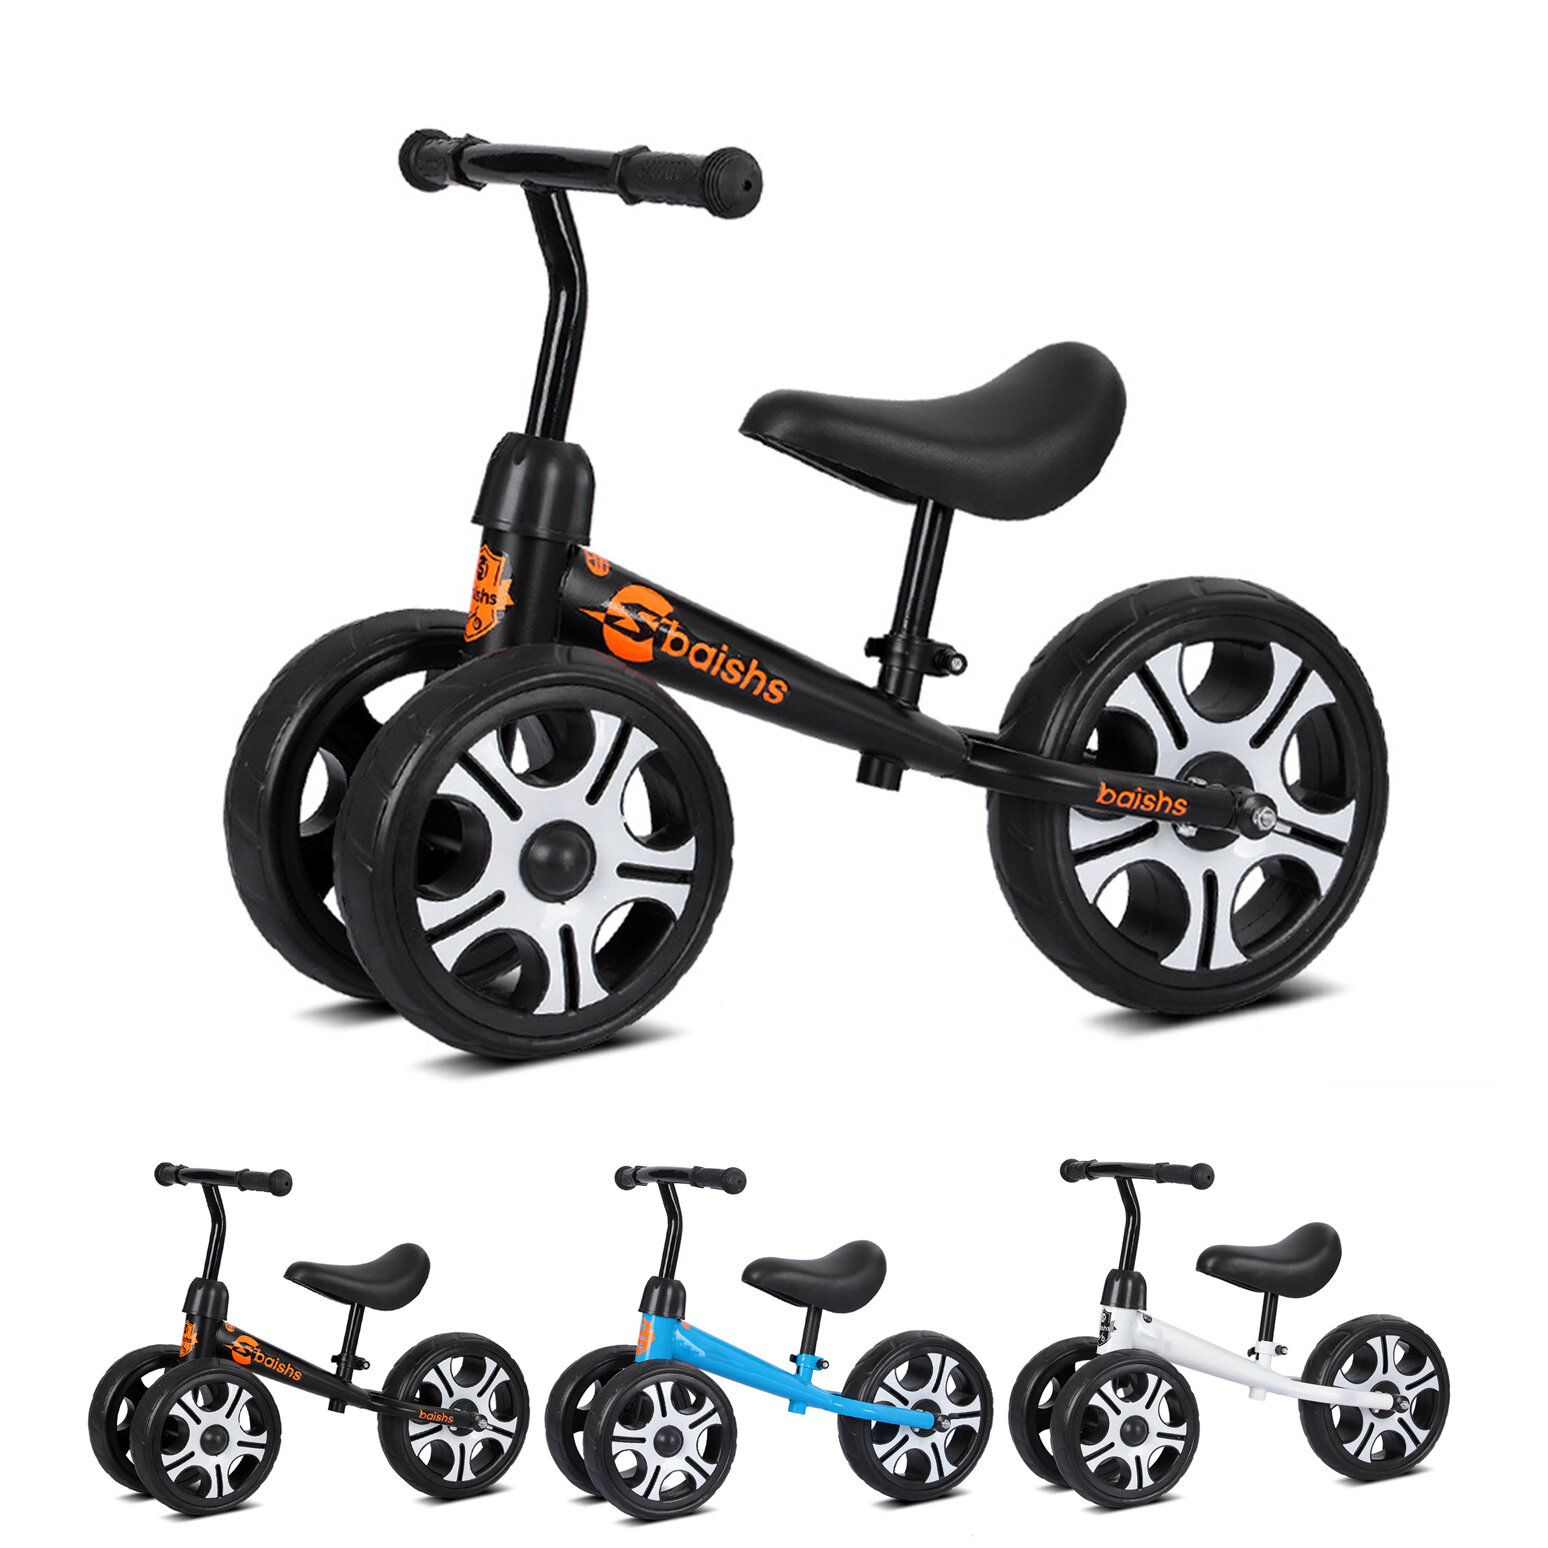 pedals for balance bike